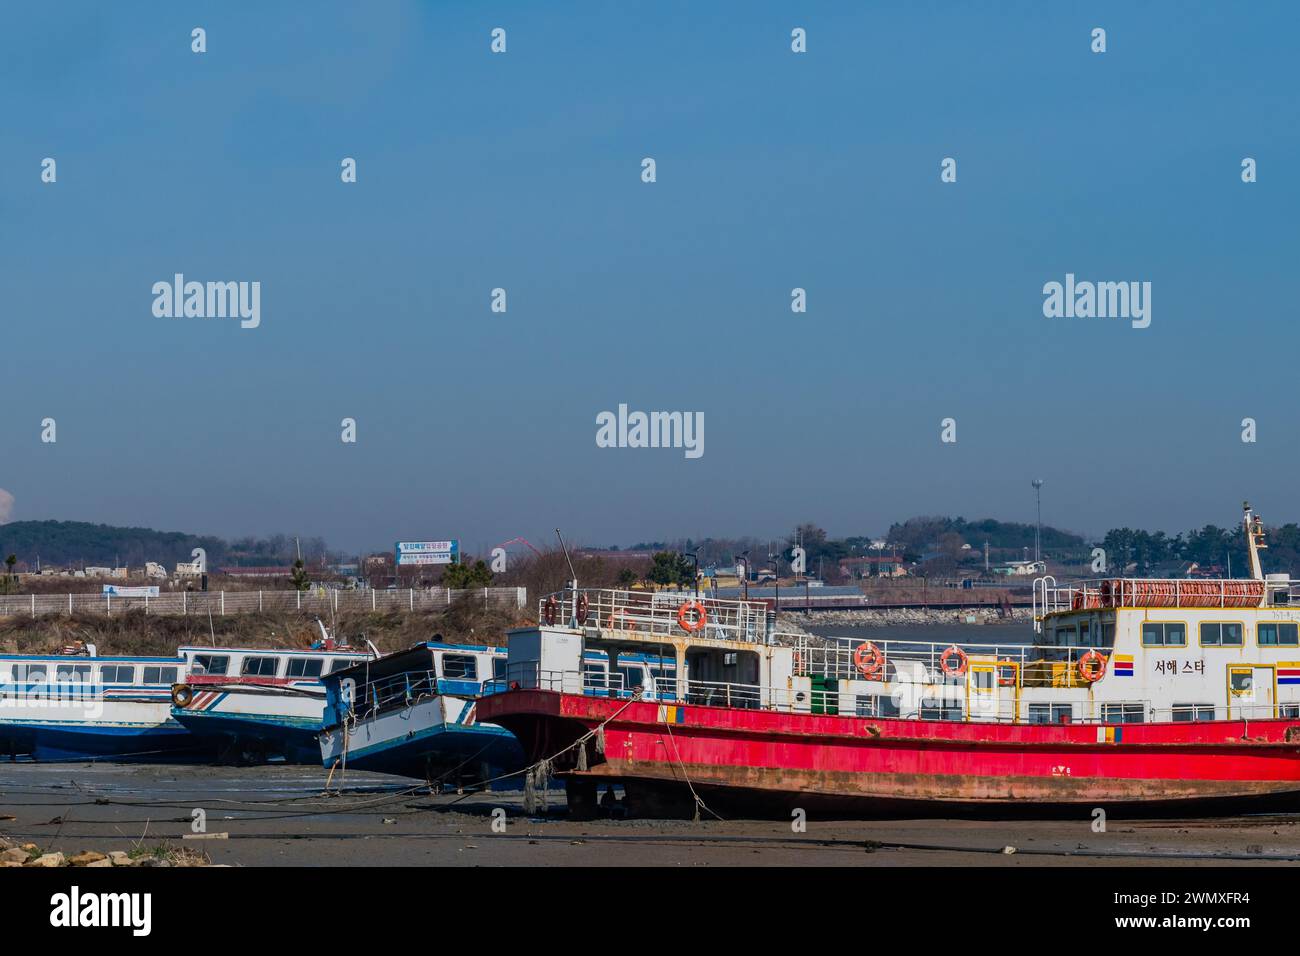 Multiple boats docked on a riverbed with clear blue skies in Pyteakeong, South Korea Stock Photo